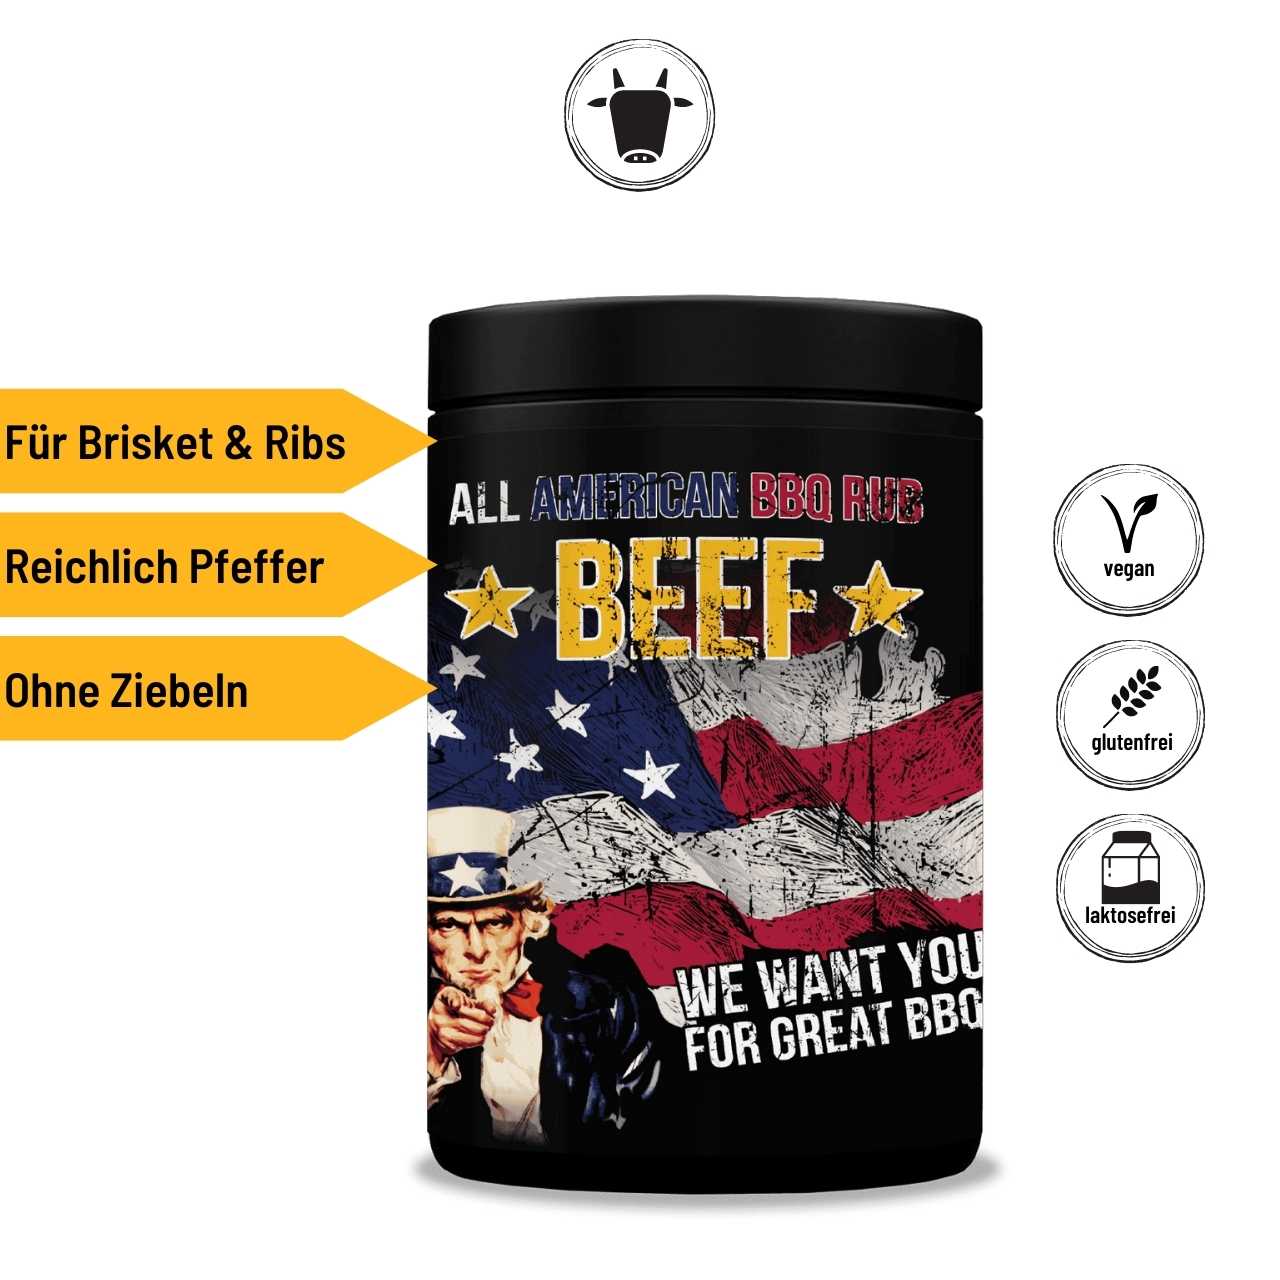 Royal Spice - All American Beef 350g